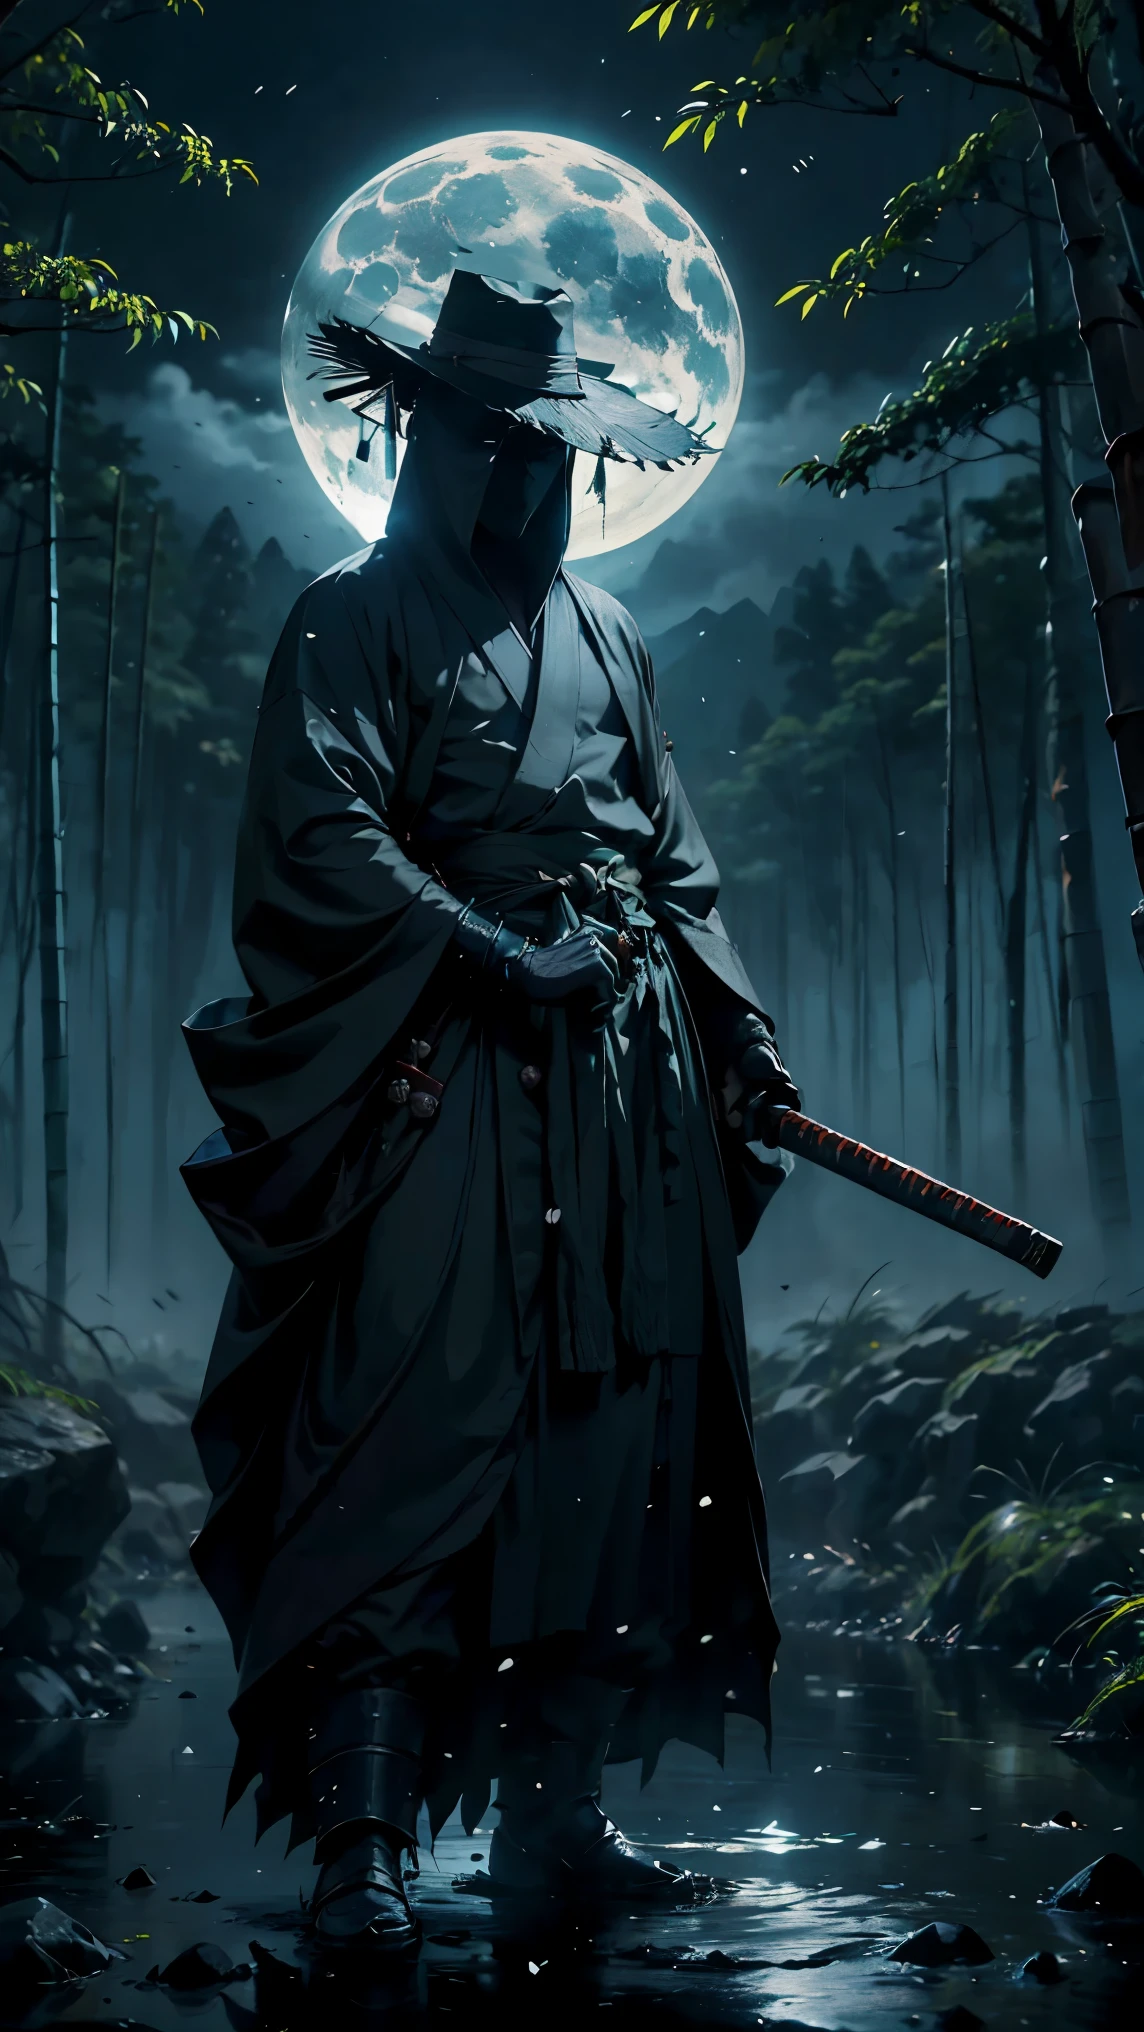 (Best Quality,ultra detailed),dark,wet,artificial raindrops falling,ancient japanese warrior standing in the rain,japanese traditional bamboo hat(fail),dense forest landscape,majestic and serene nature,full moon shining brightly in the night sky,black kimono with fluorescent red stripes that glow in the moonlight,samurai sword sharpened and drawn(katana),